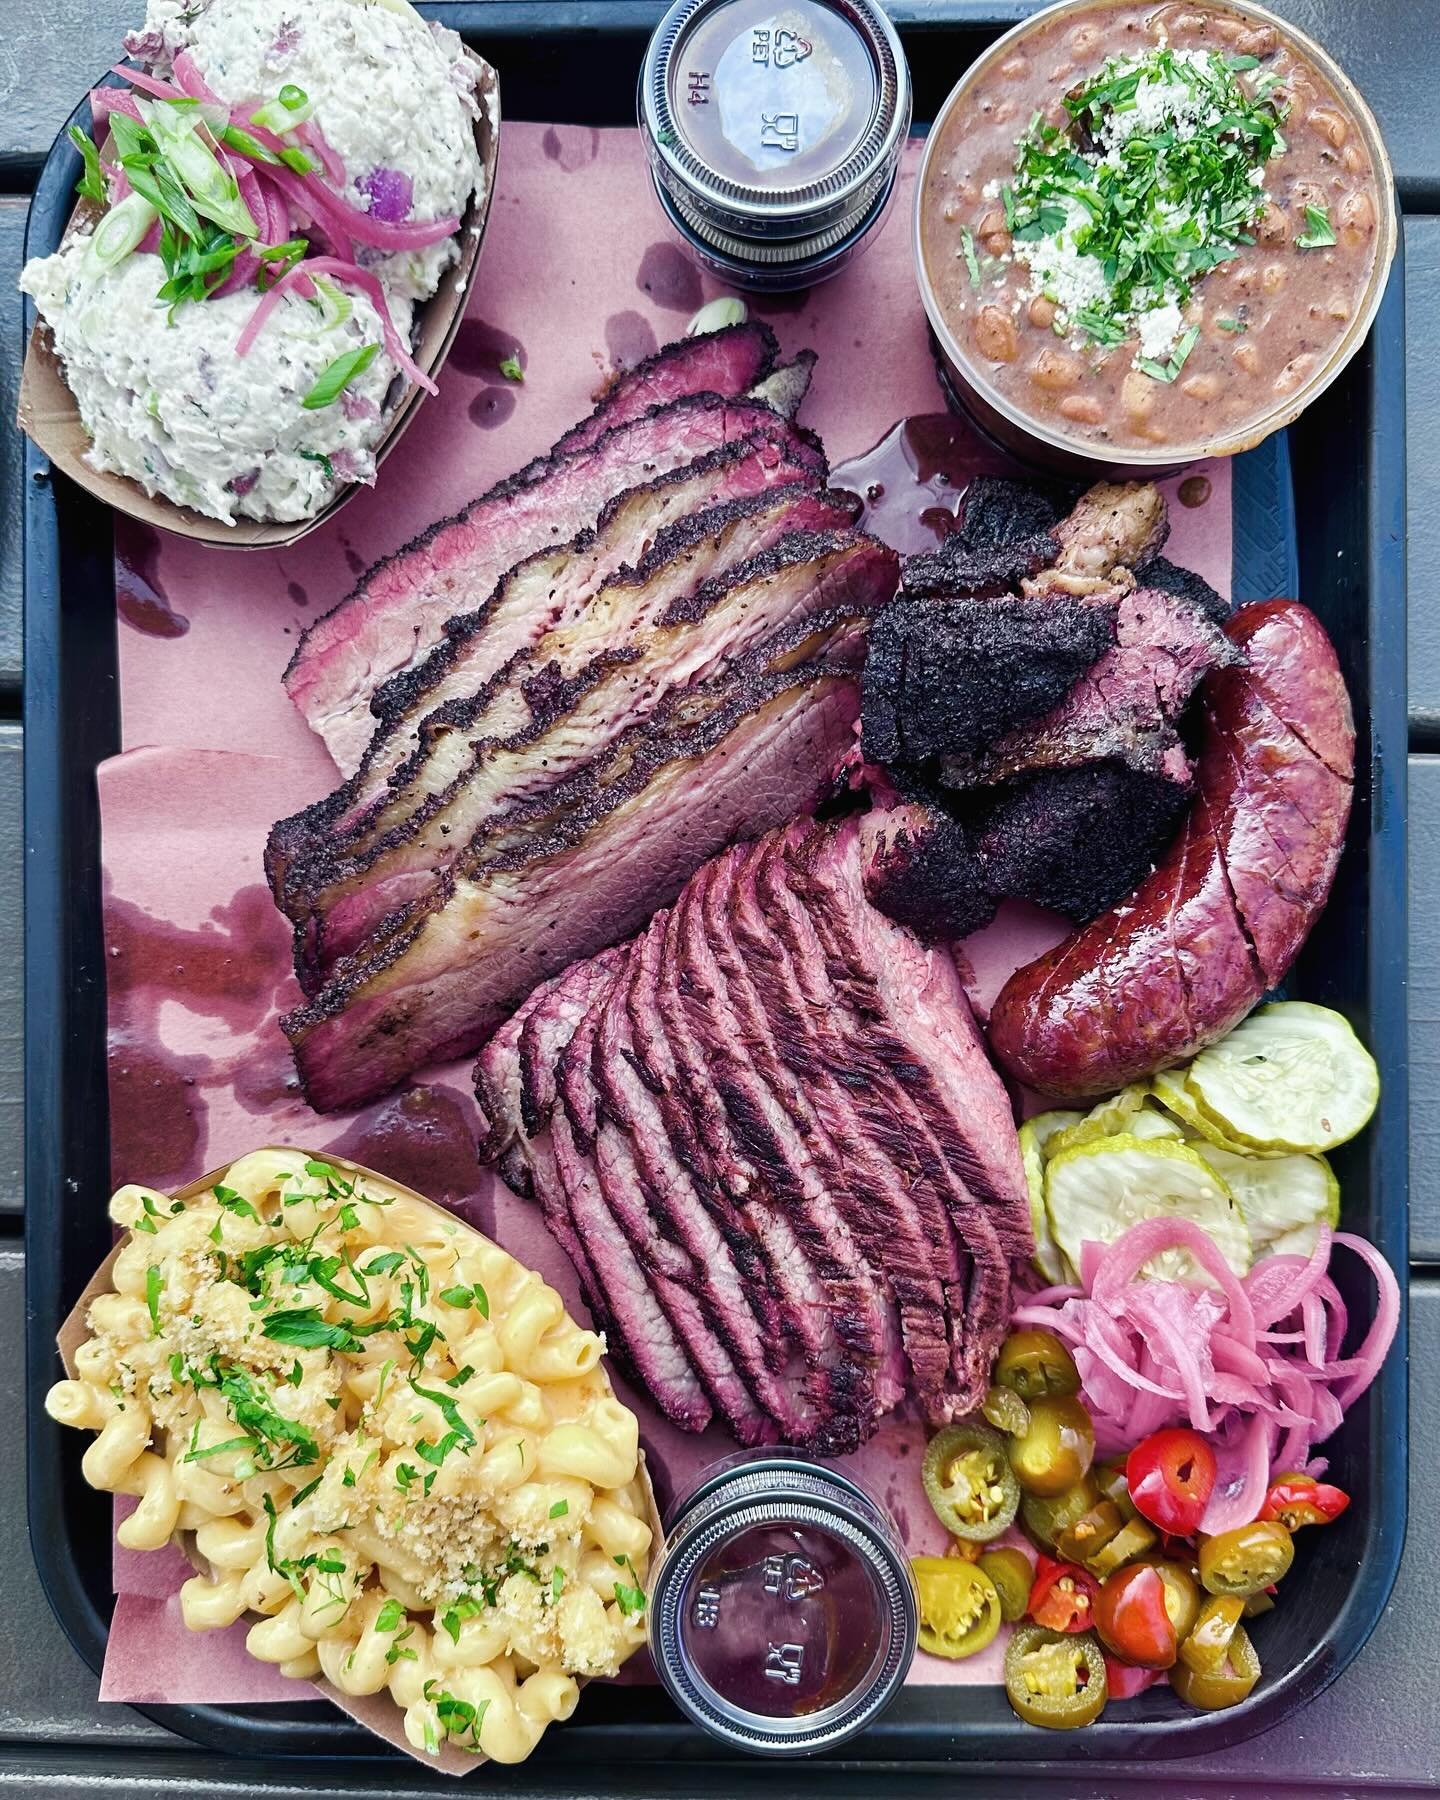 The Birthday Weekend Food Fest continued with a trip down to @heritagebarbecue in San Juan Capistrano for a little snack. 

We enjoyed Brisket (sliced and burnt ends), Tri-tip, Leek &amp; Garlic Sausage, Potato Salad, Brisket Baked Beans and Mac n Ch